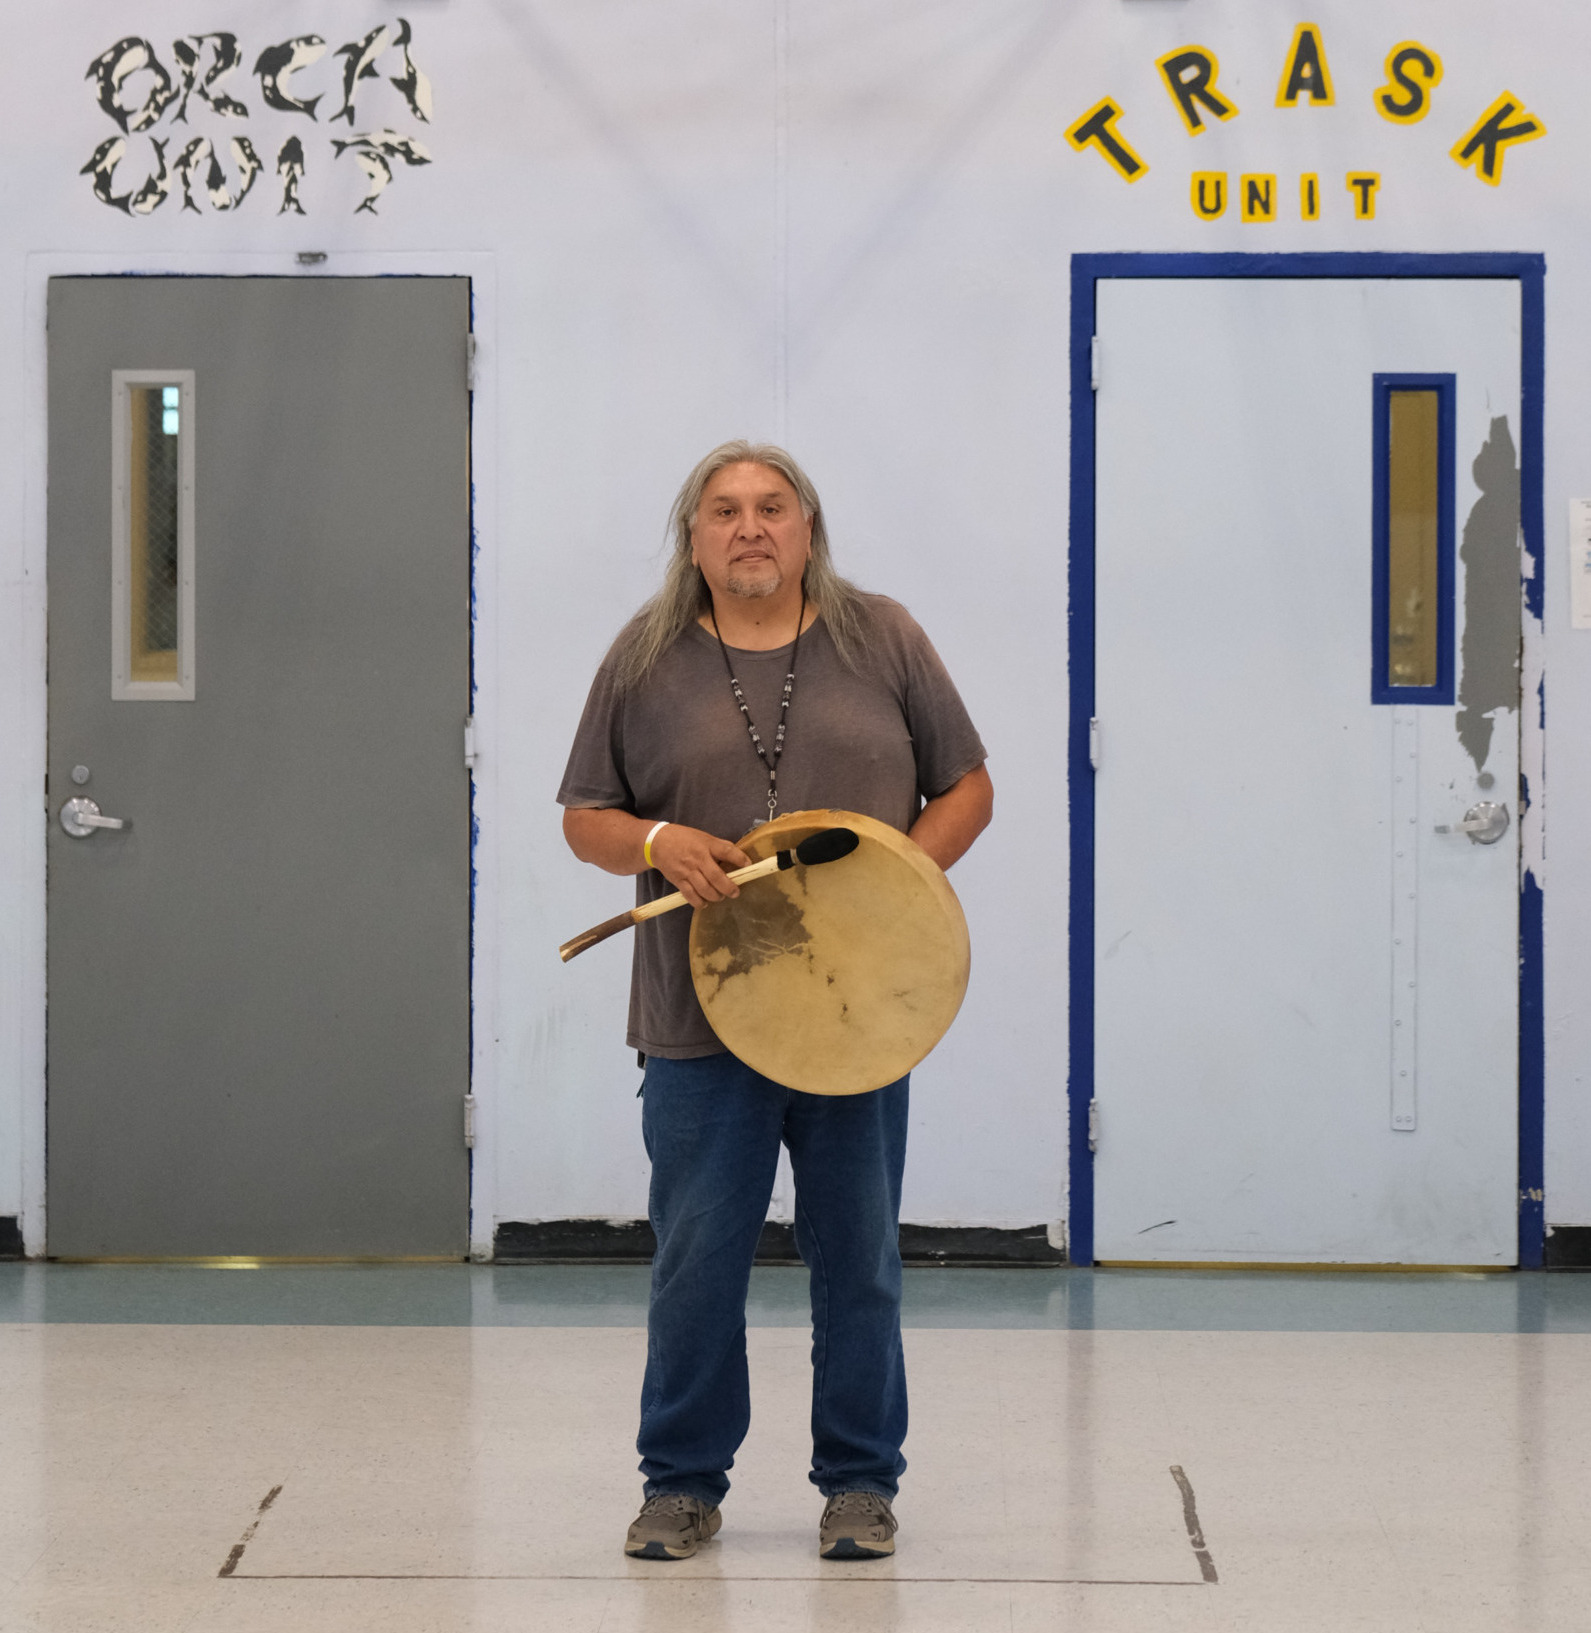 Native American rituals: Native American elder man with long gray hair in jeans and gray t-shirt stands under indoor basketball court hoop holding drum